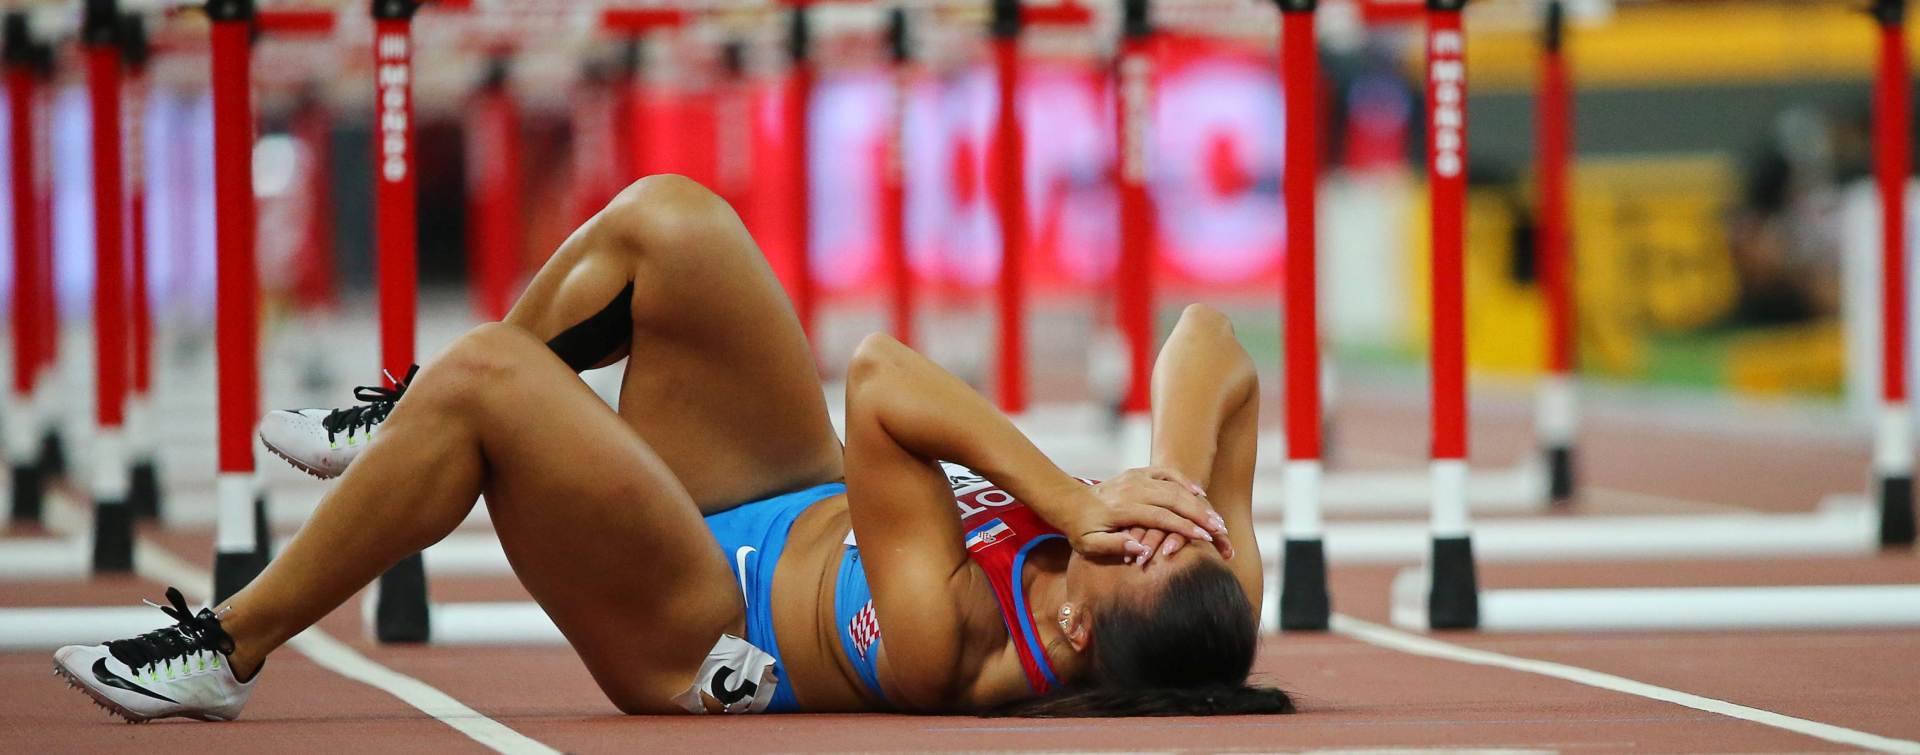 epa04901869 Croatia's Andrea Ivancevic reacts after falling in the women's 100m Hurdles heats during the Beijing 2015 IAAF World Championships at the National Stadium, also known as Bird's Nest, in Beijing, China, 28 August 2015.  EPA/SRDJAN SUKI